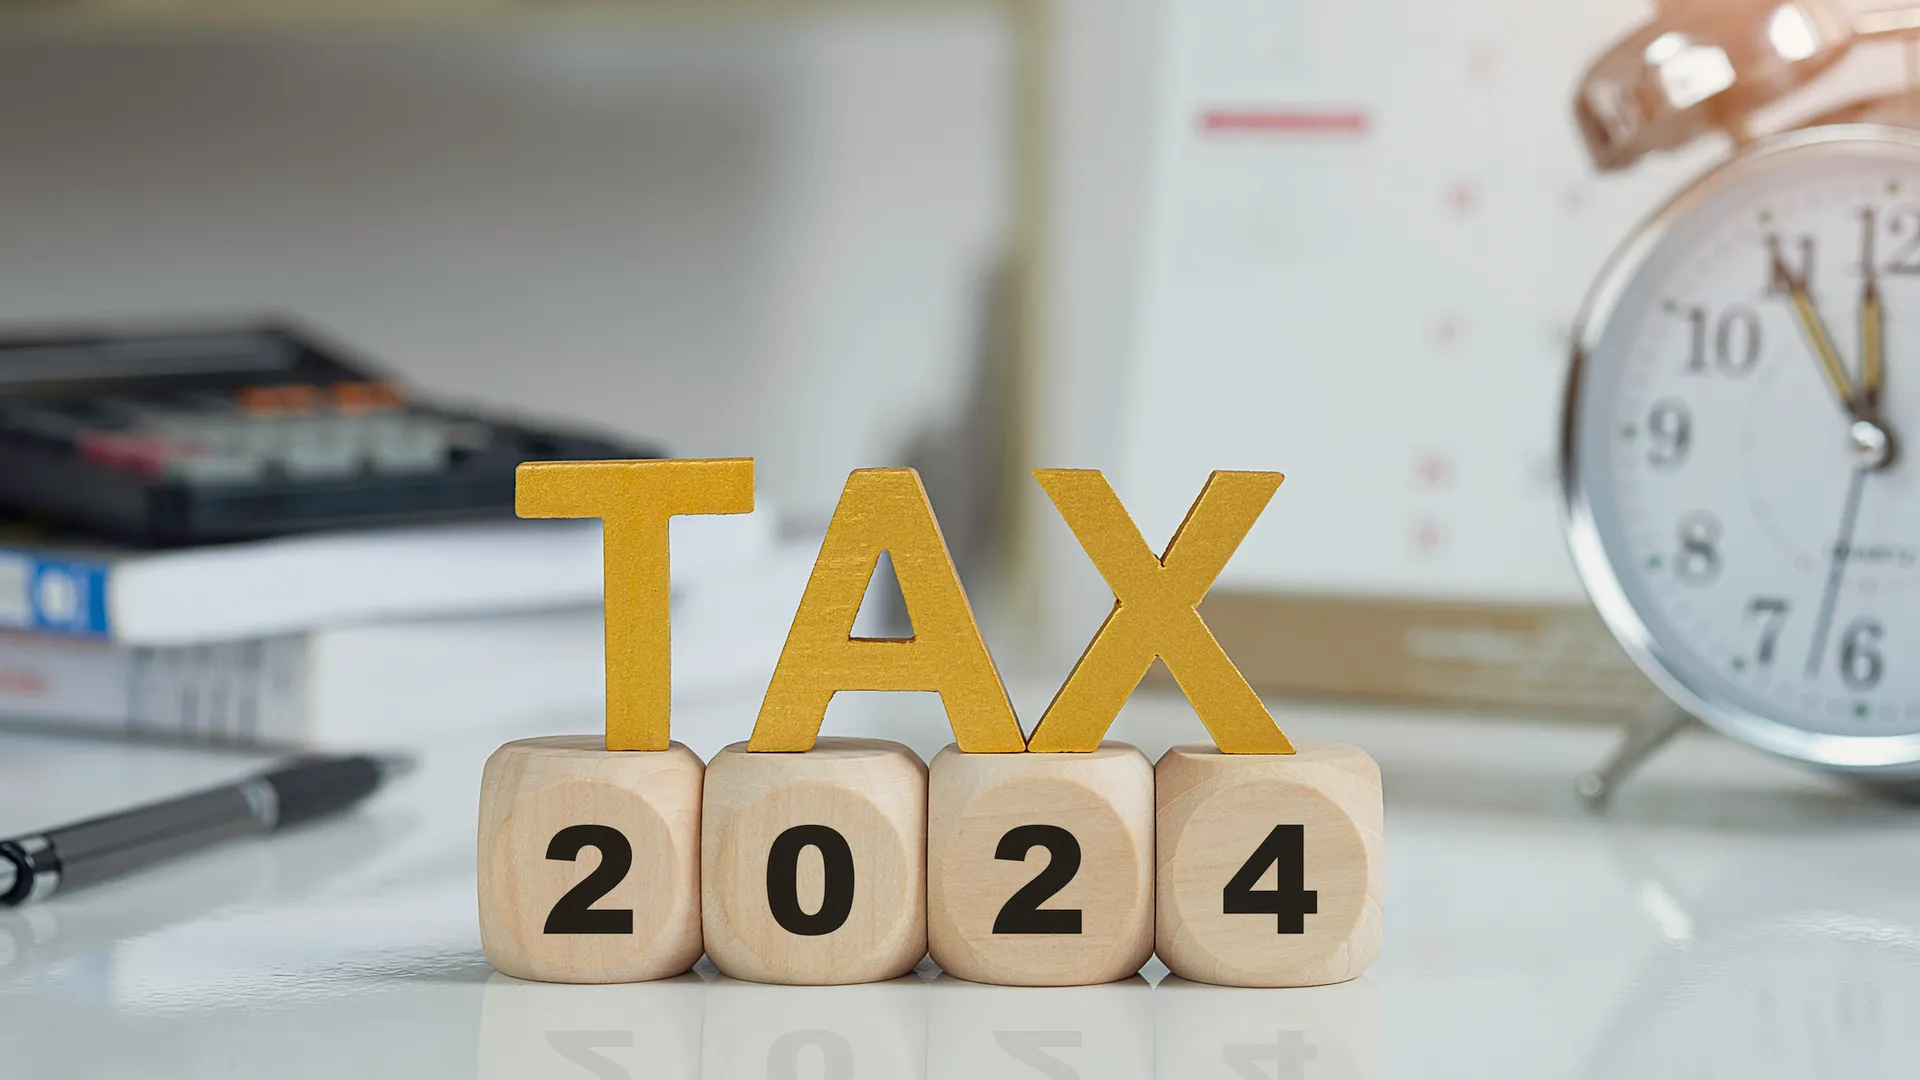 Tax and Vat 2024 Concept.